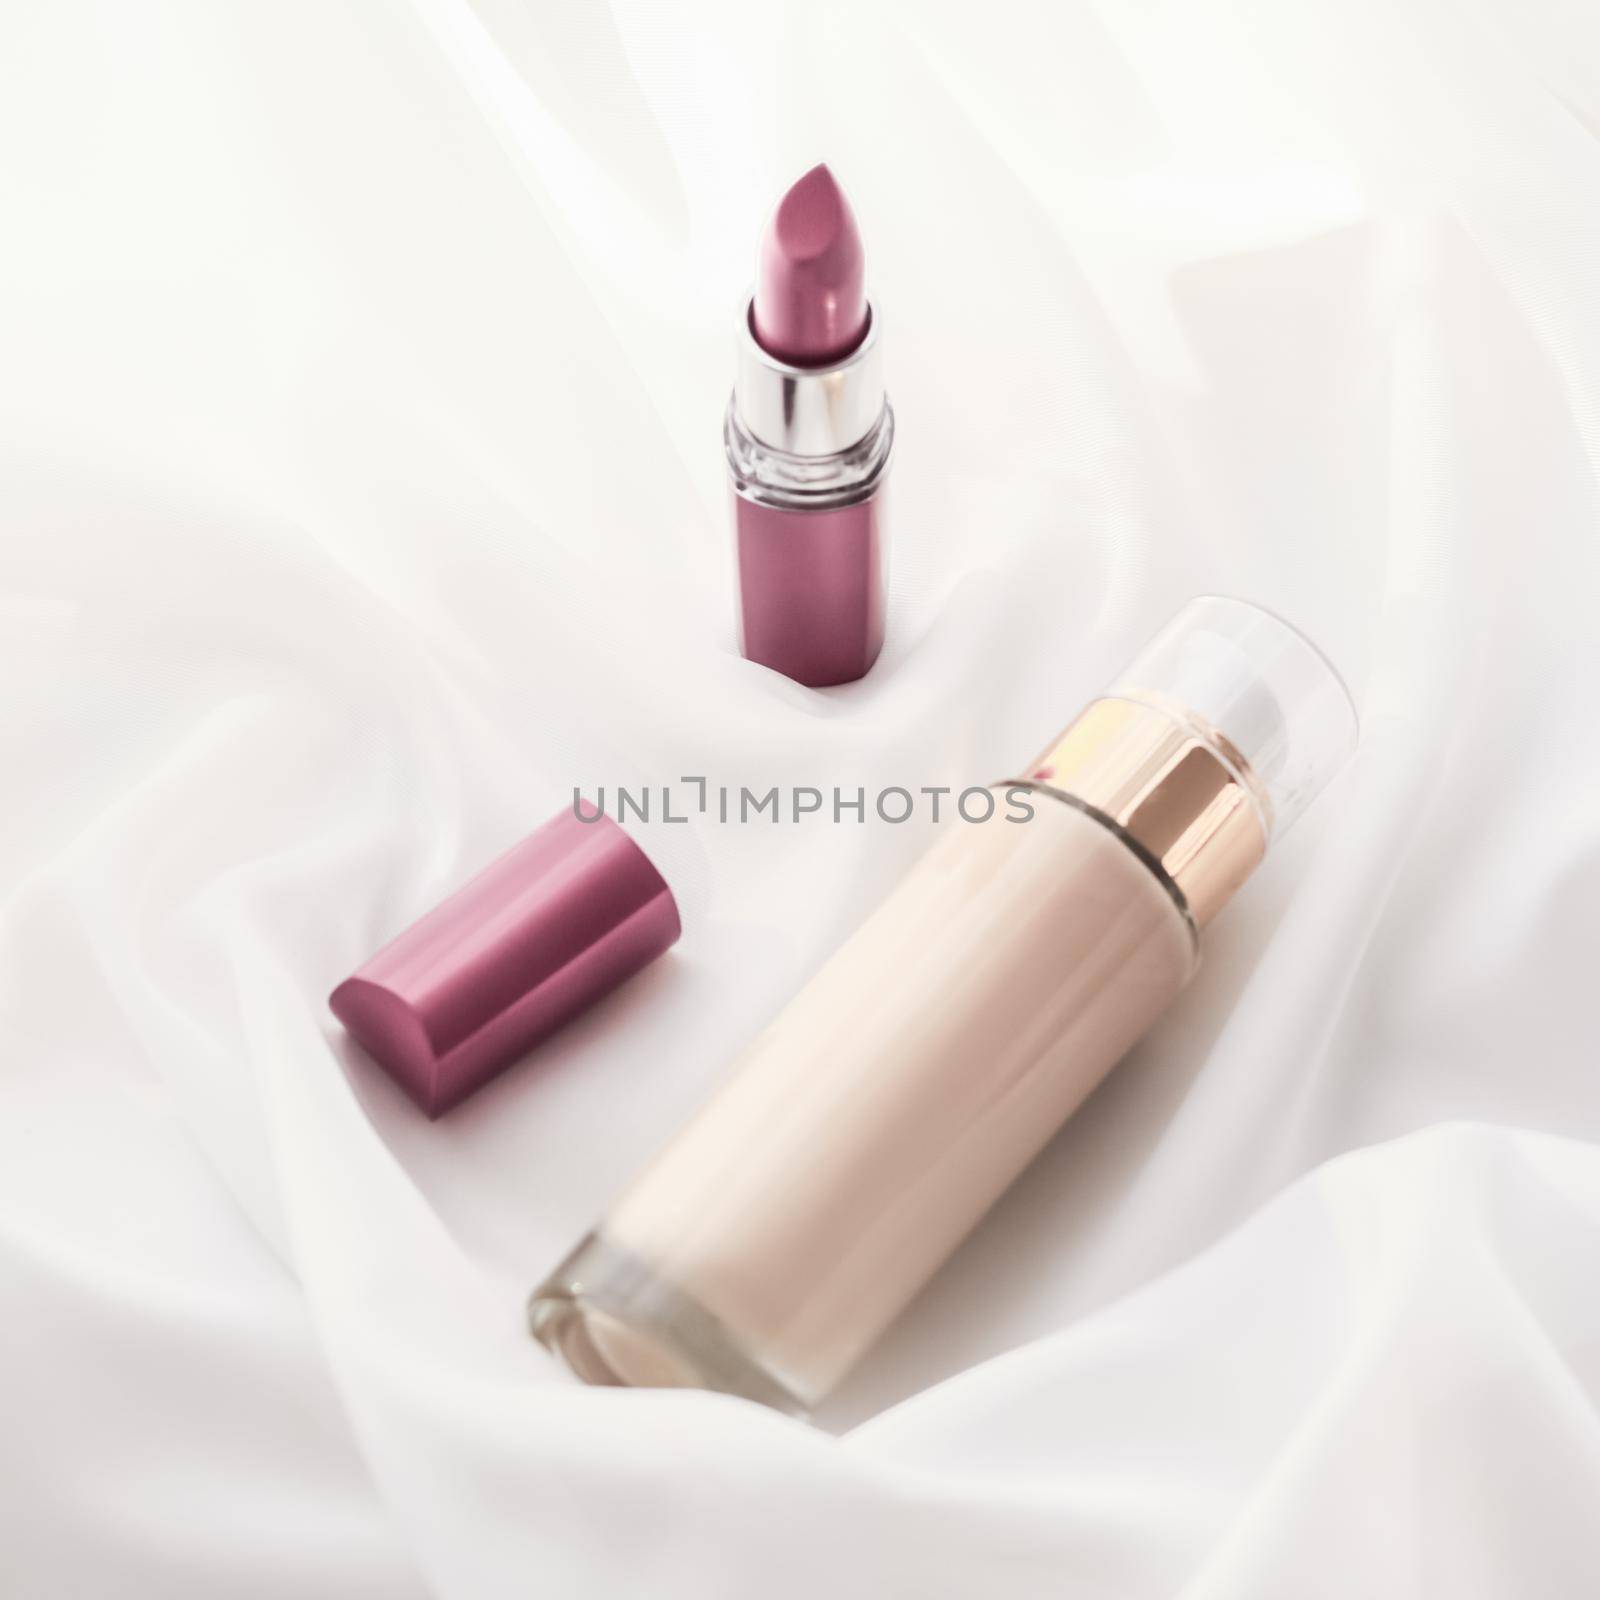 Beige tonal cream bottle make-up fluid foundation base and pink lipstick on silk background, cosmetics products as luxury beauty brand holiday design by Anneleven